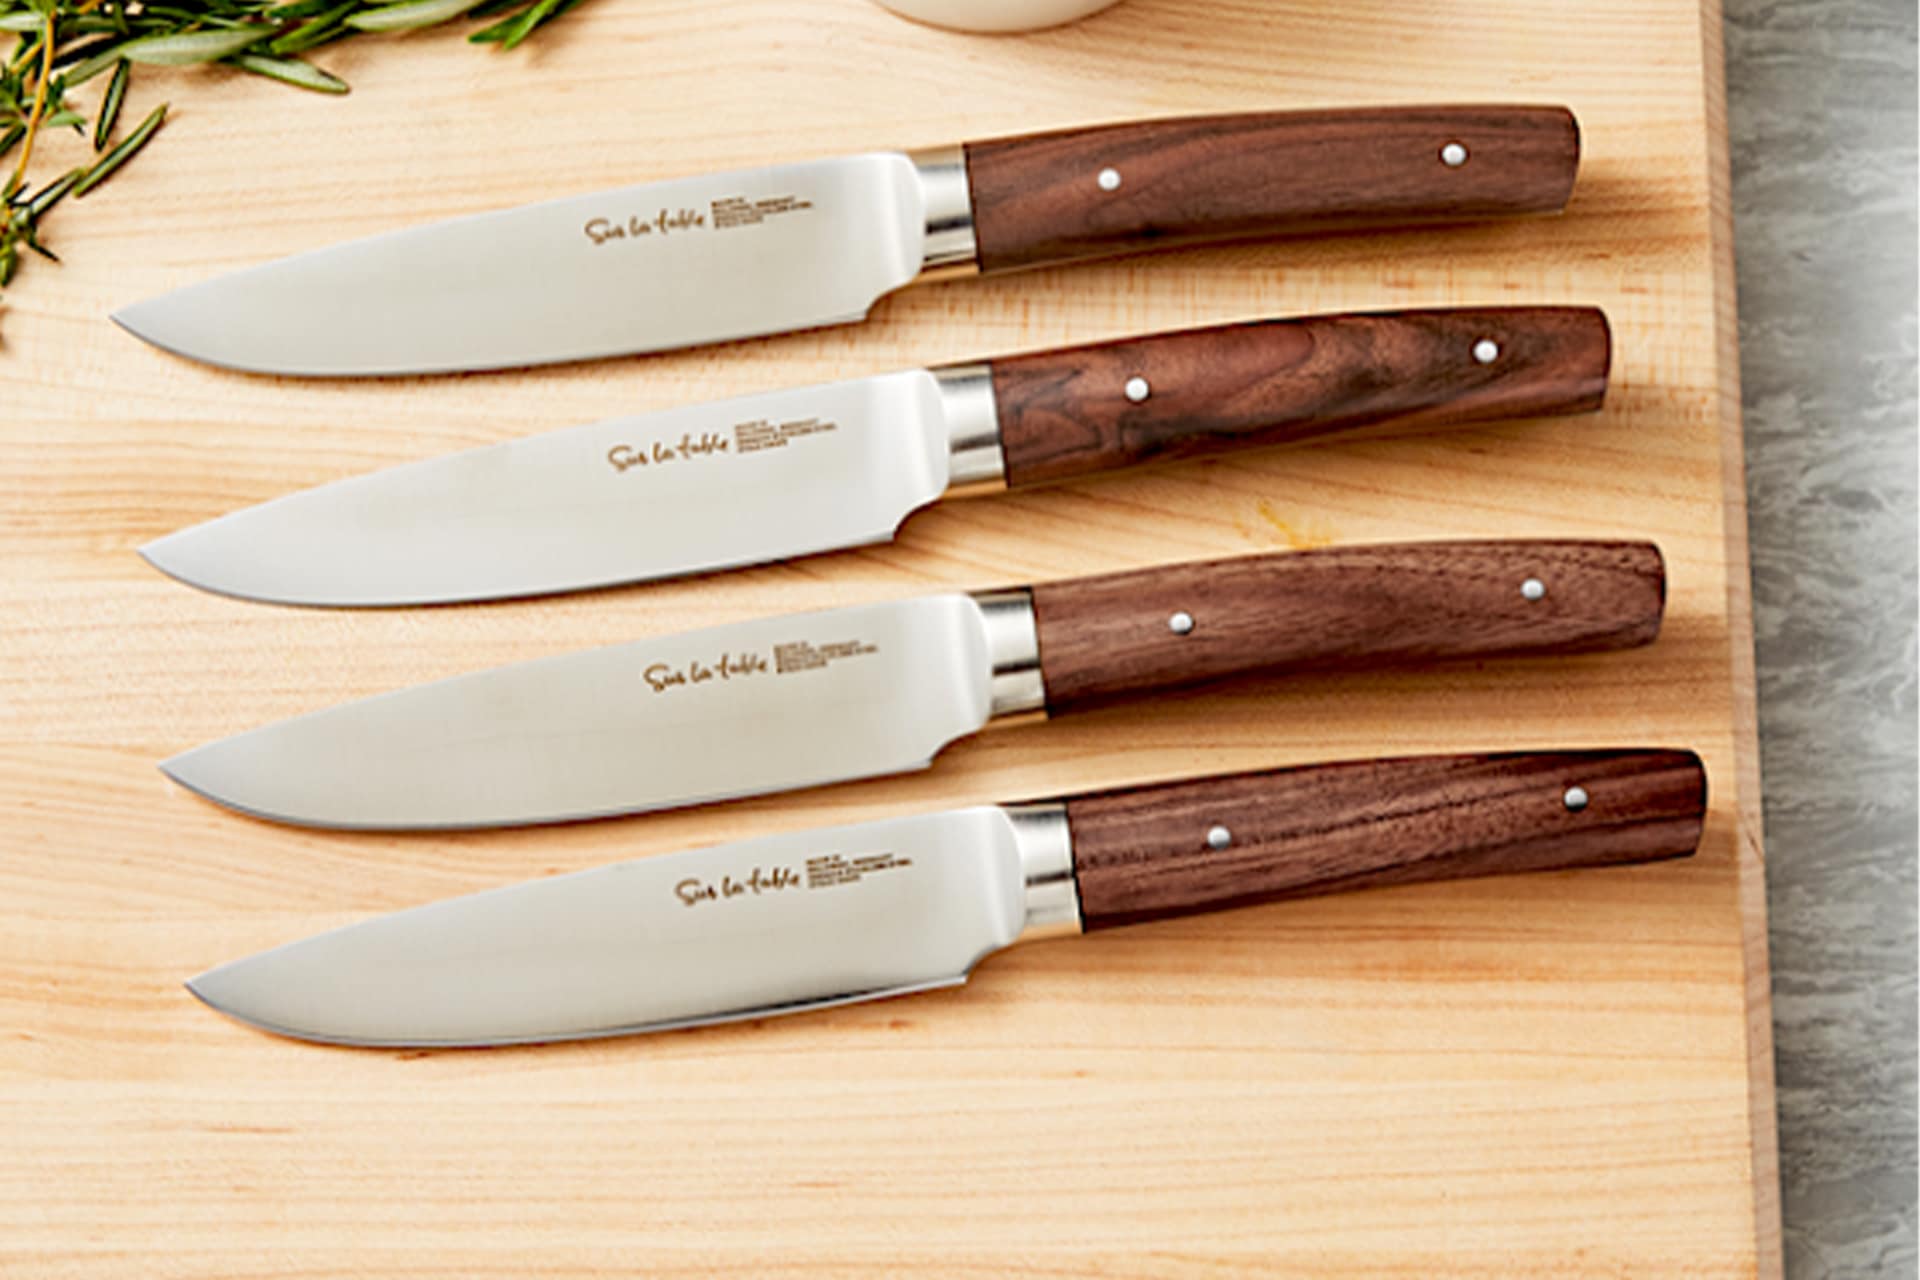 Sur La Table Adds German-Made Cutlery Collection